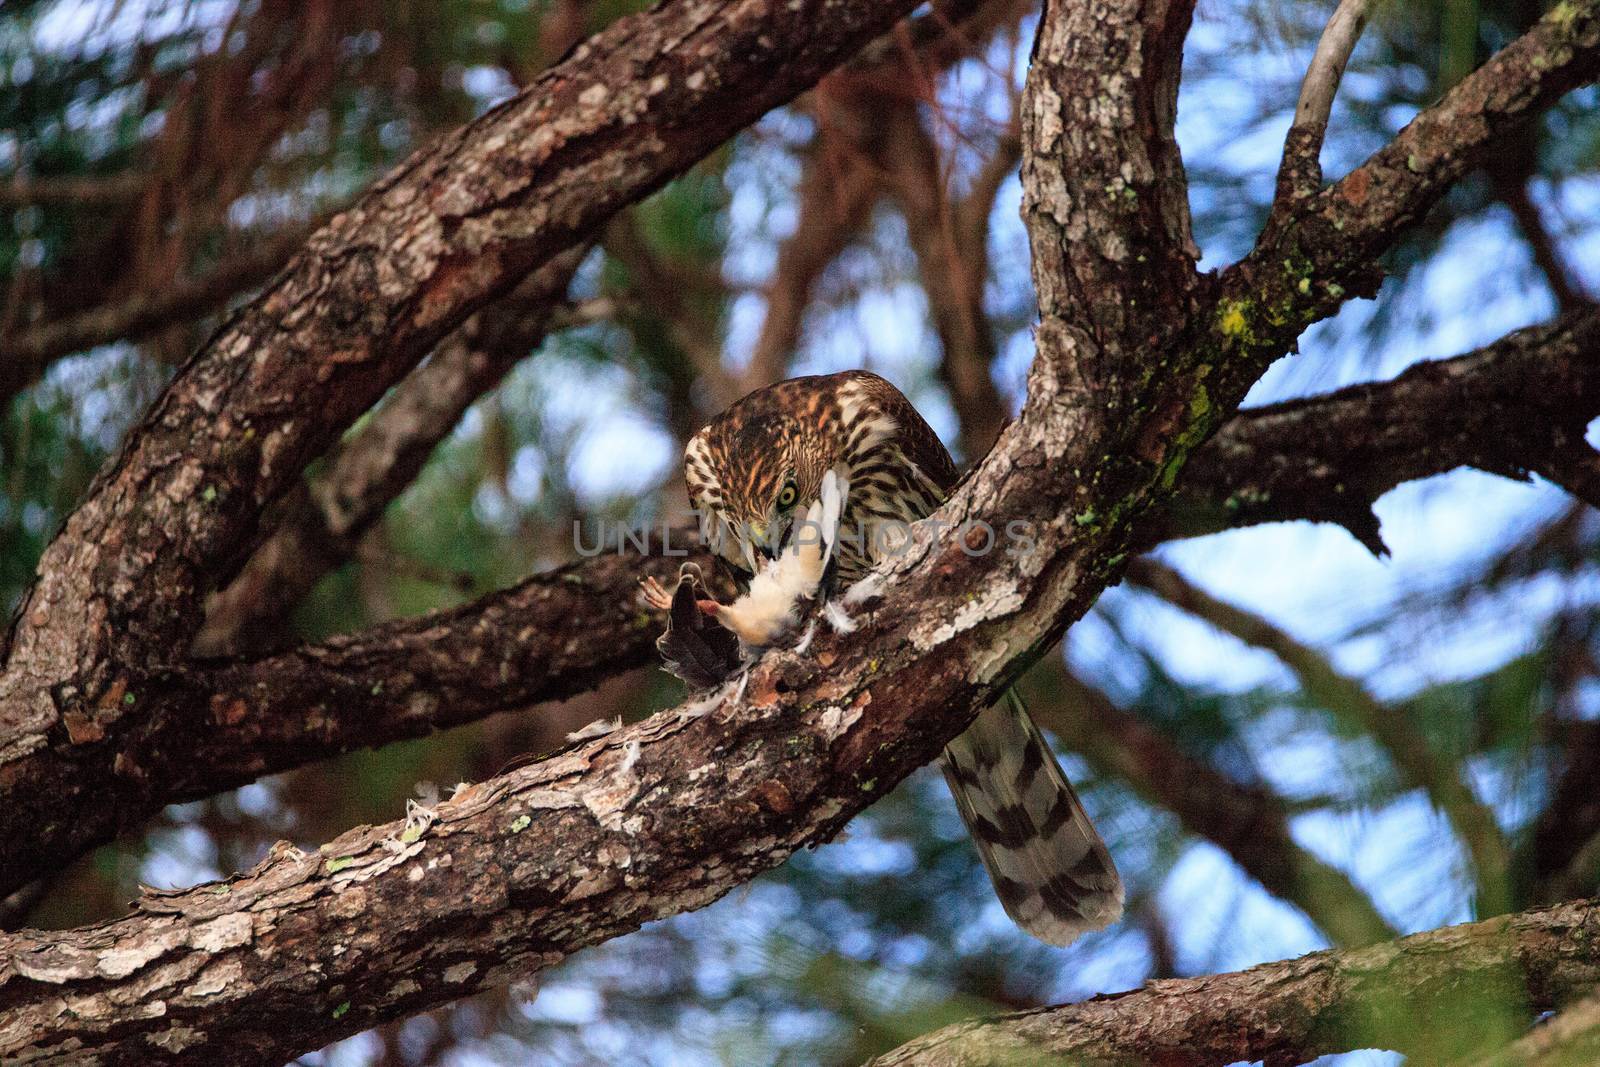 Juvenile light morph Red-tailed hawk Buteo jamaicensis eats a blue jay in a pine tree in Naples, Florida